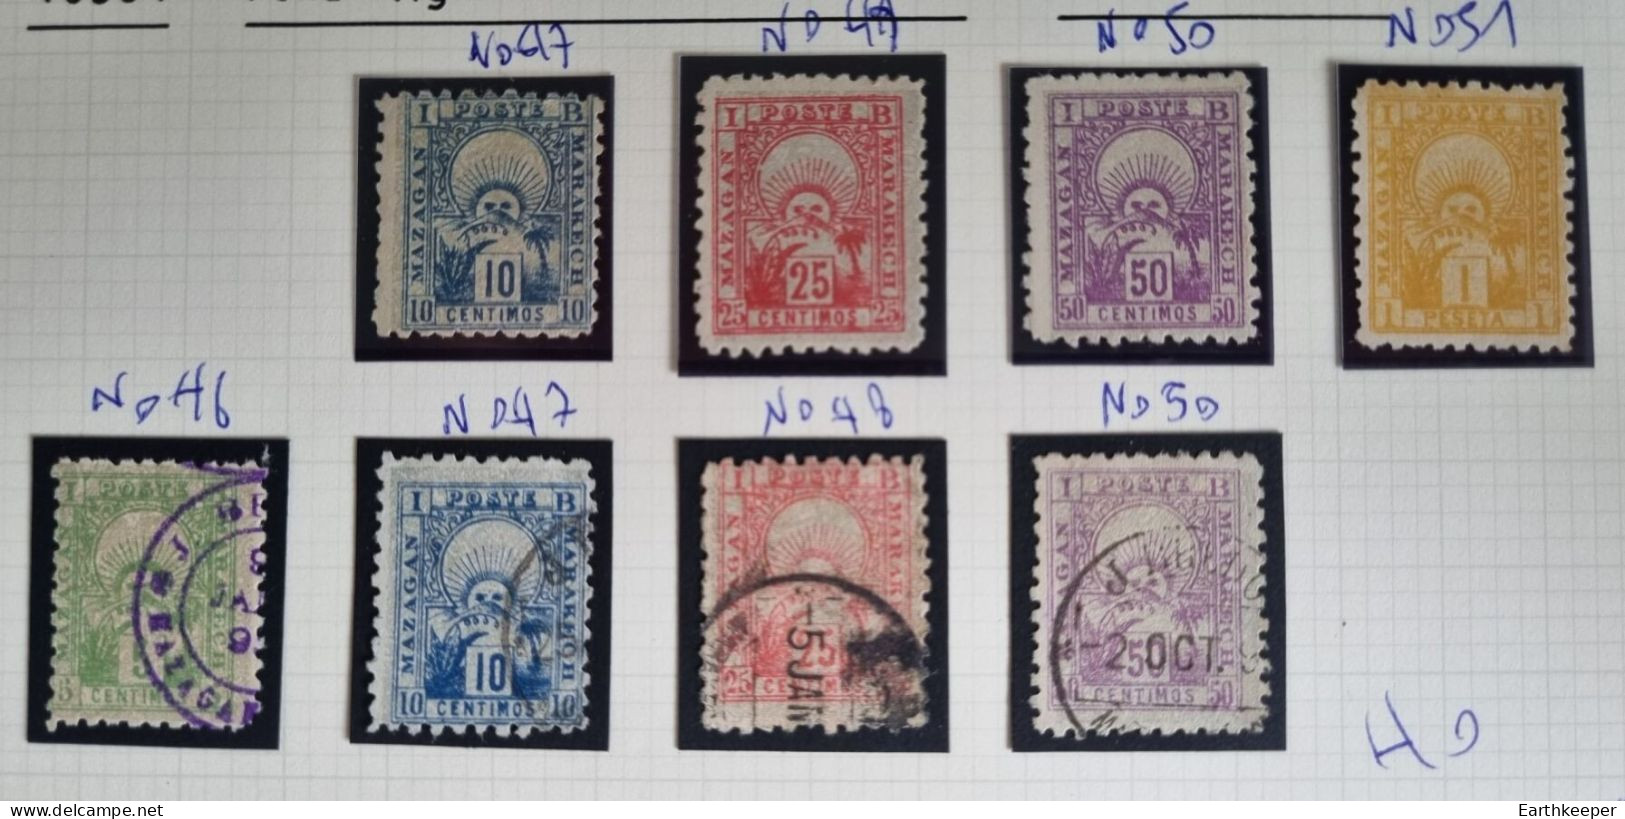 TIMBRE MAROC POSTE LOCALE 1893 N°46 A N°51 MAZAGAN MARRAKECH - Locals & Carriers